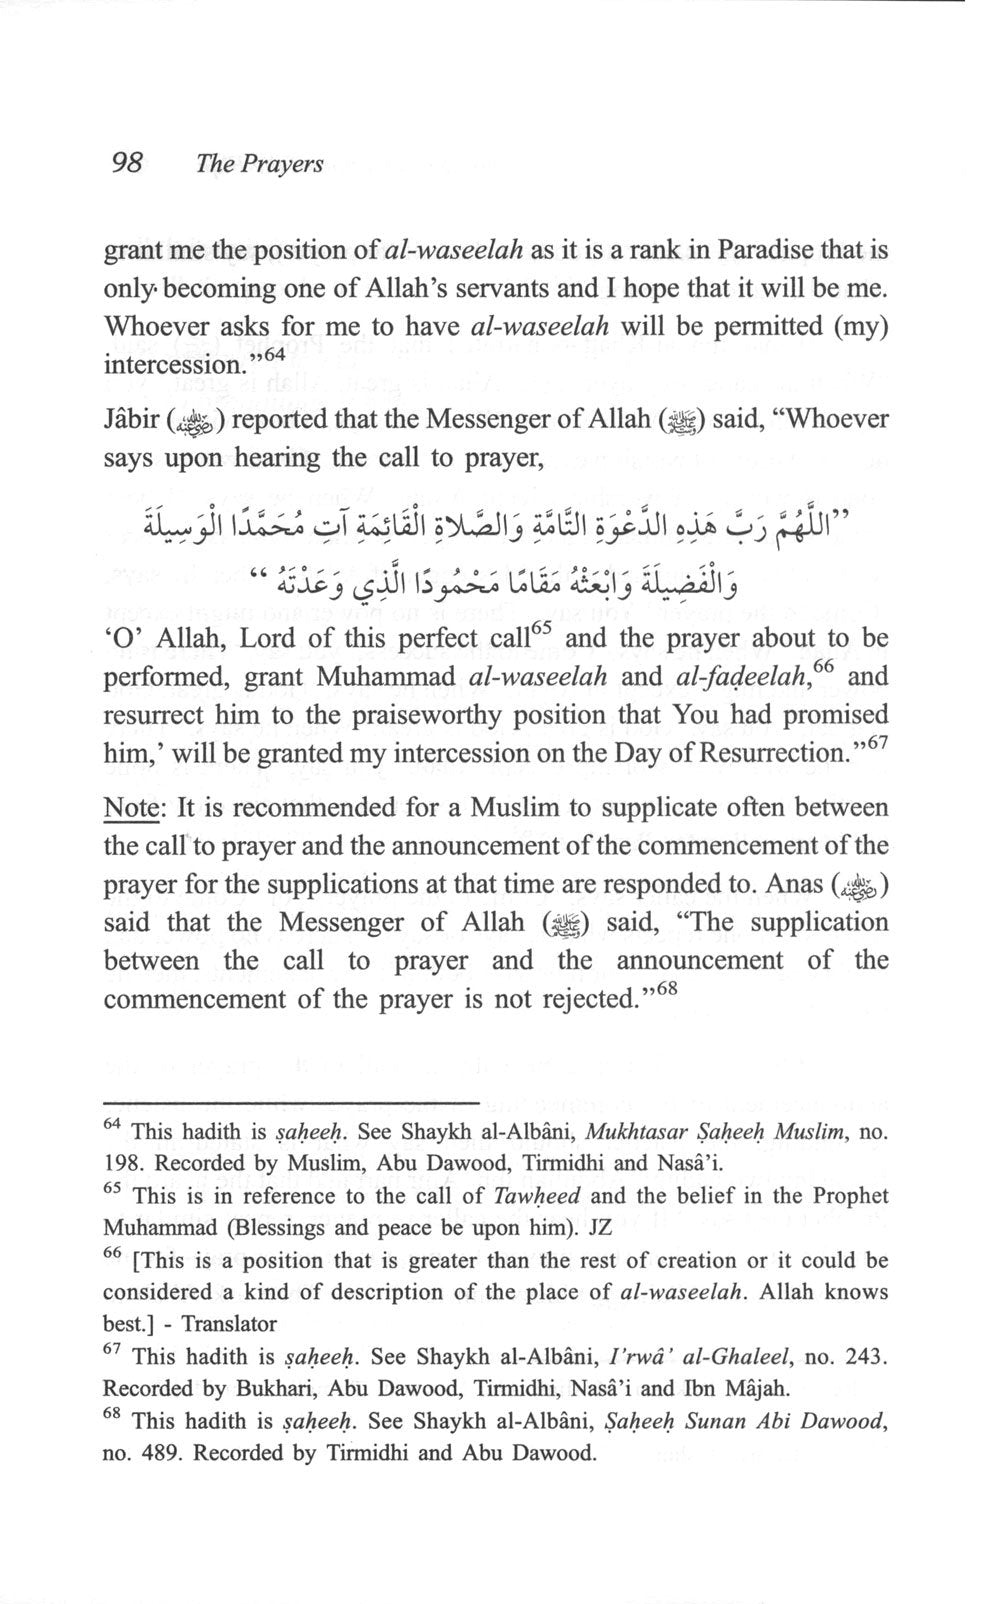 The Concise Presentation of Fiqh